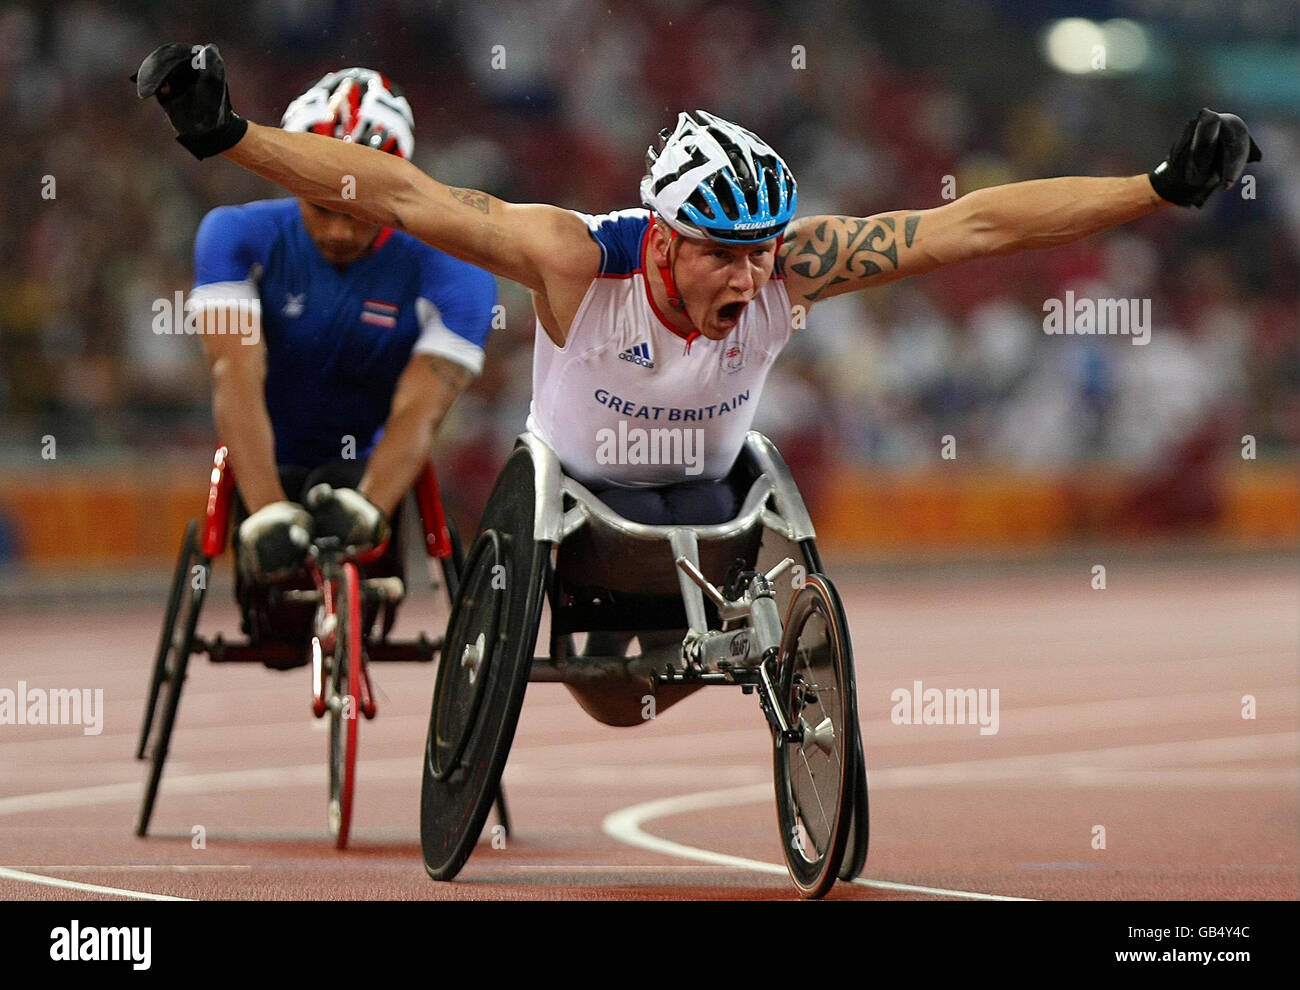 Paralympics - Beijing Paralympic Games 2008 - Day Ten. Great Britain's David Weir winning the gold in the men's T54 1500M Final in the National Stadium, in Beijing, China. Stock Photo